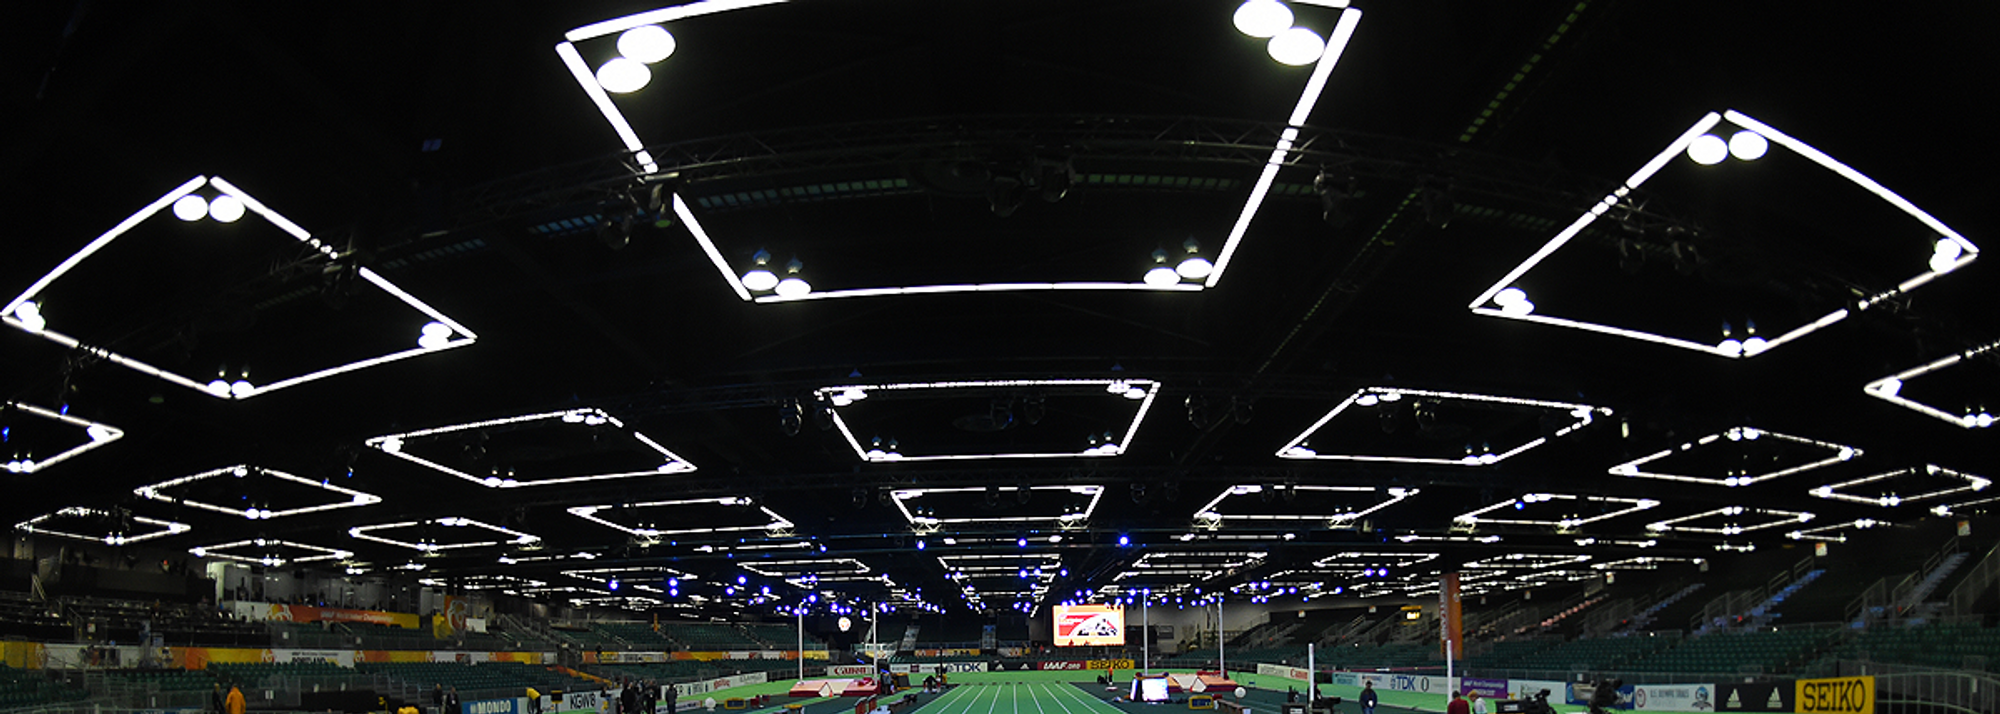 Already a global leader in producing sustainable multi-day sporting events, TrackTown USA turned the IAAF World Indoor Championships Portland 2016 into a showcase for ‘green’ events that leave a lasting impact on participants and the community.